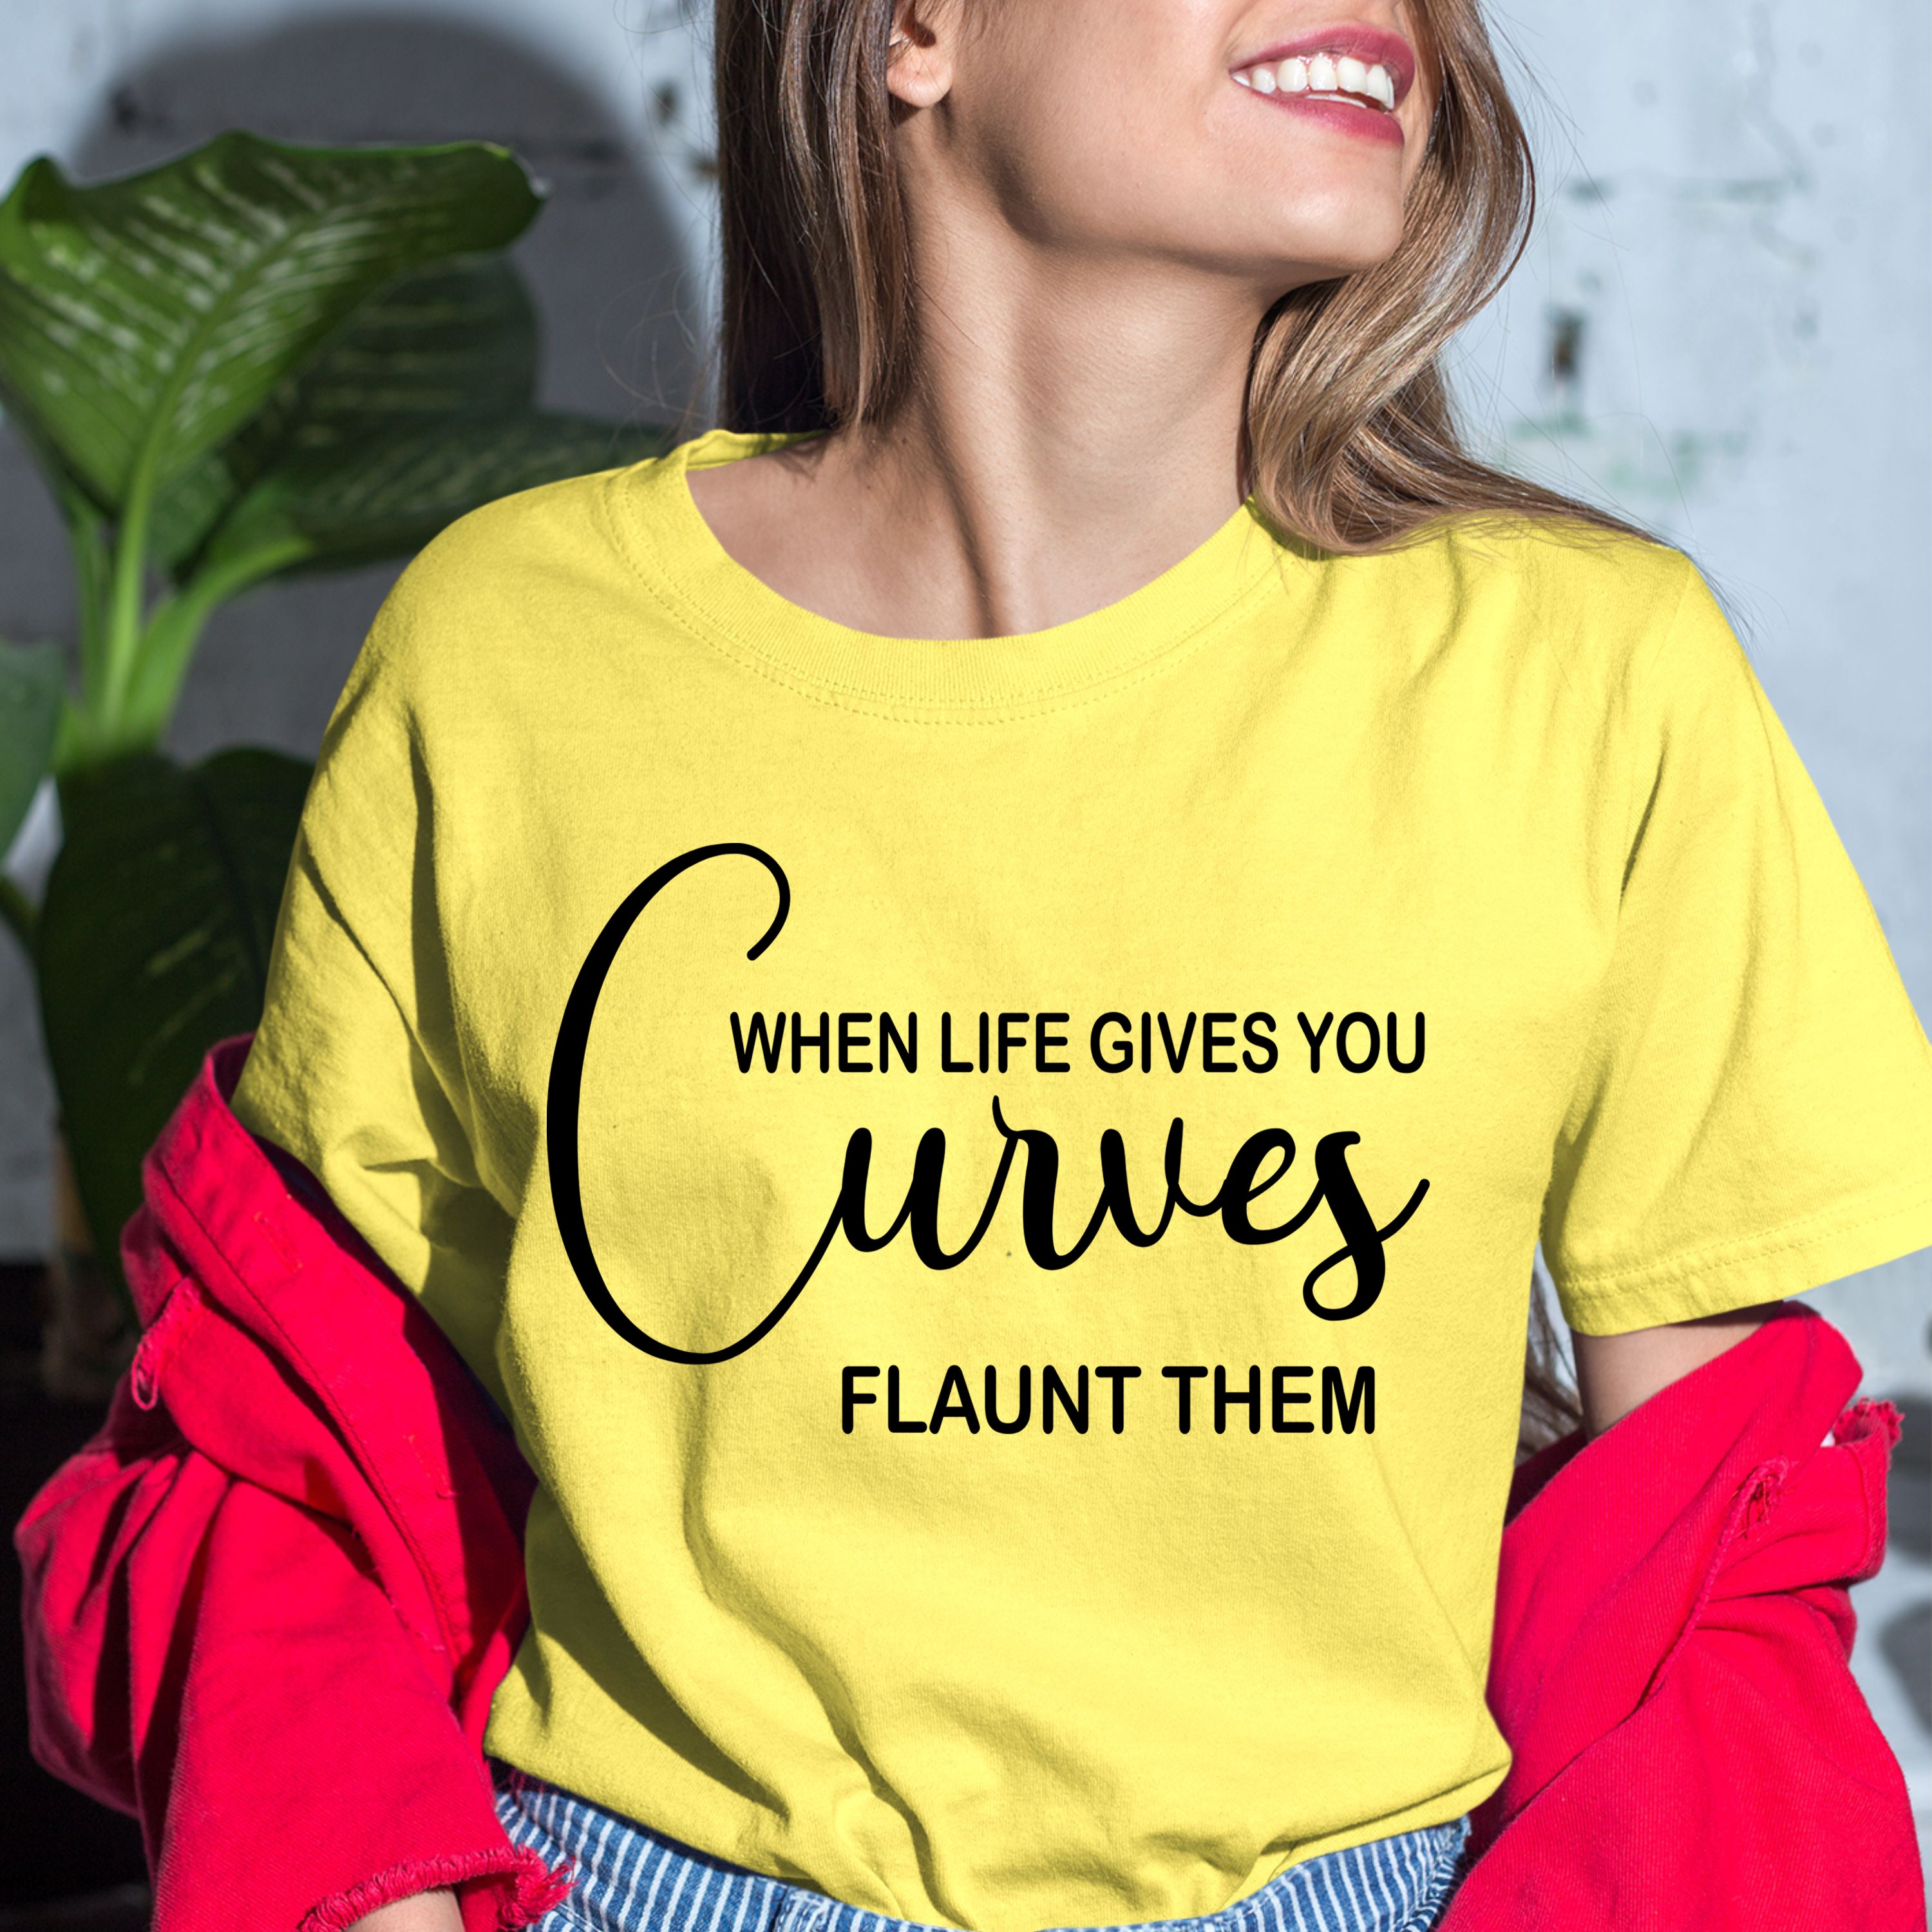 When Life Gives You Curves - Bella Canvas